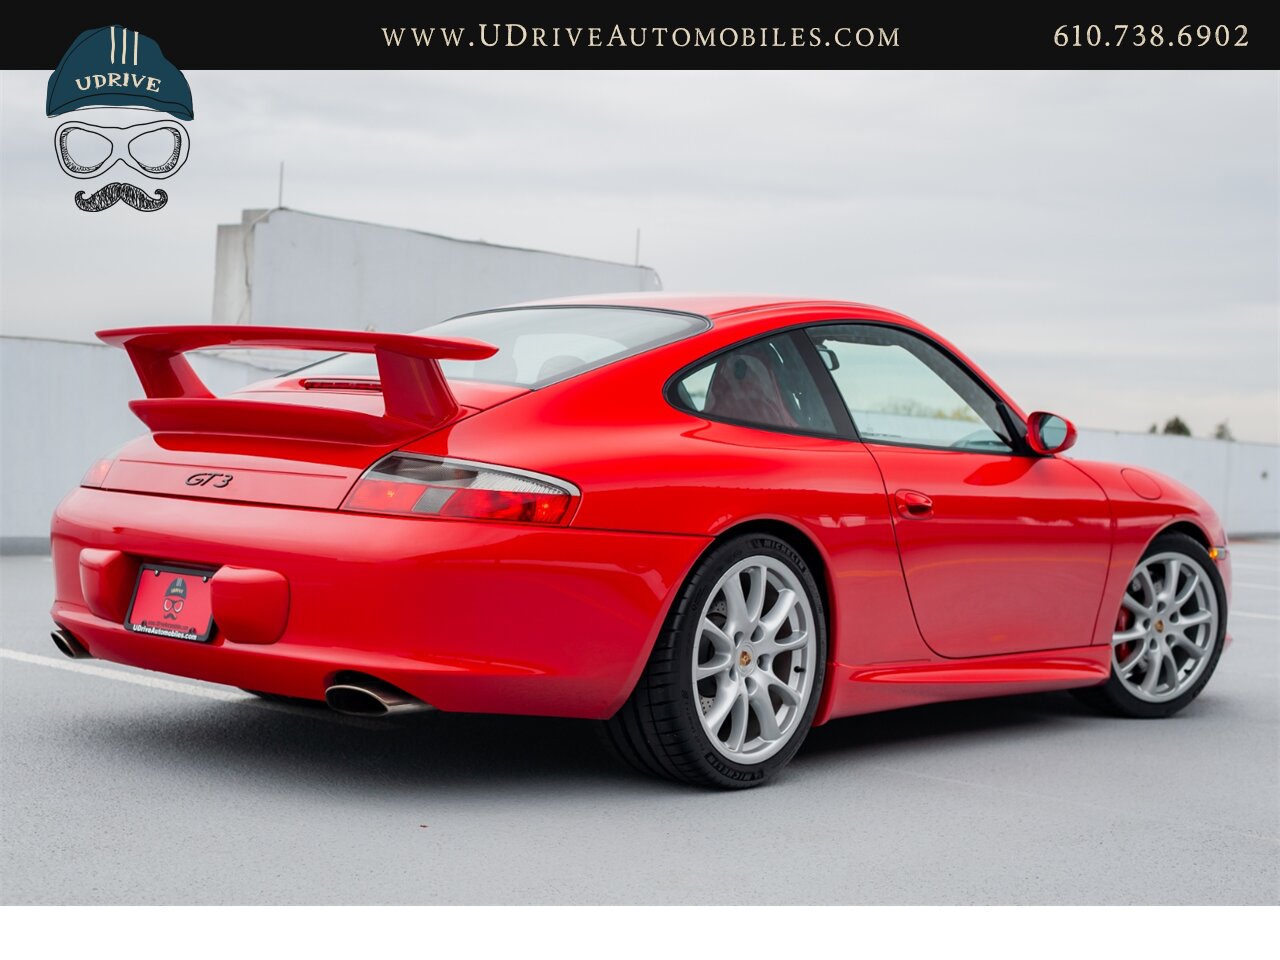 2004 Porsche 911 996 GT3 Guards Red Sport Seats Painted Hardbacks  Painted Center Console 18k Miles - Photo 4 - West Chester, PA 19382